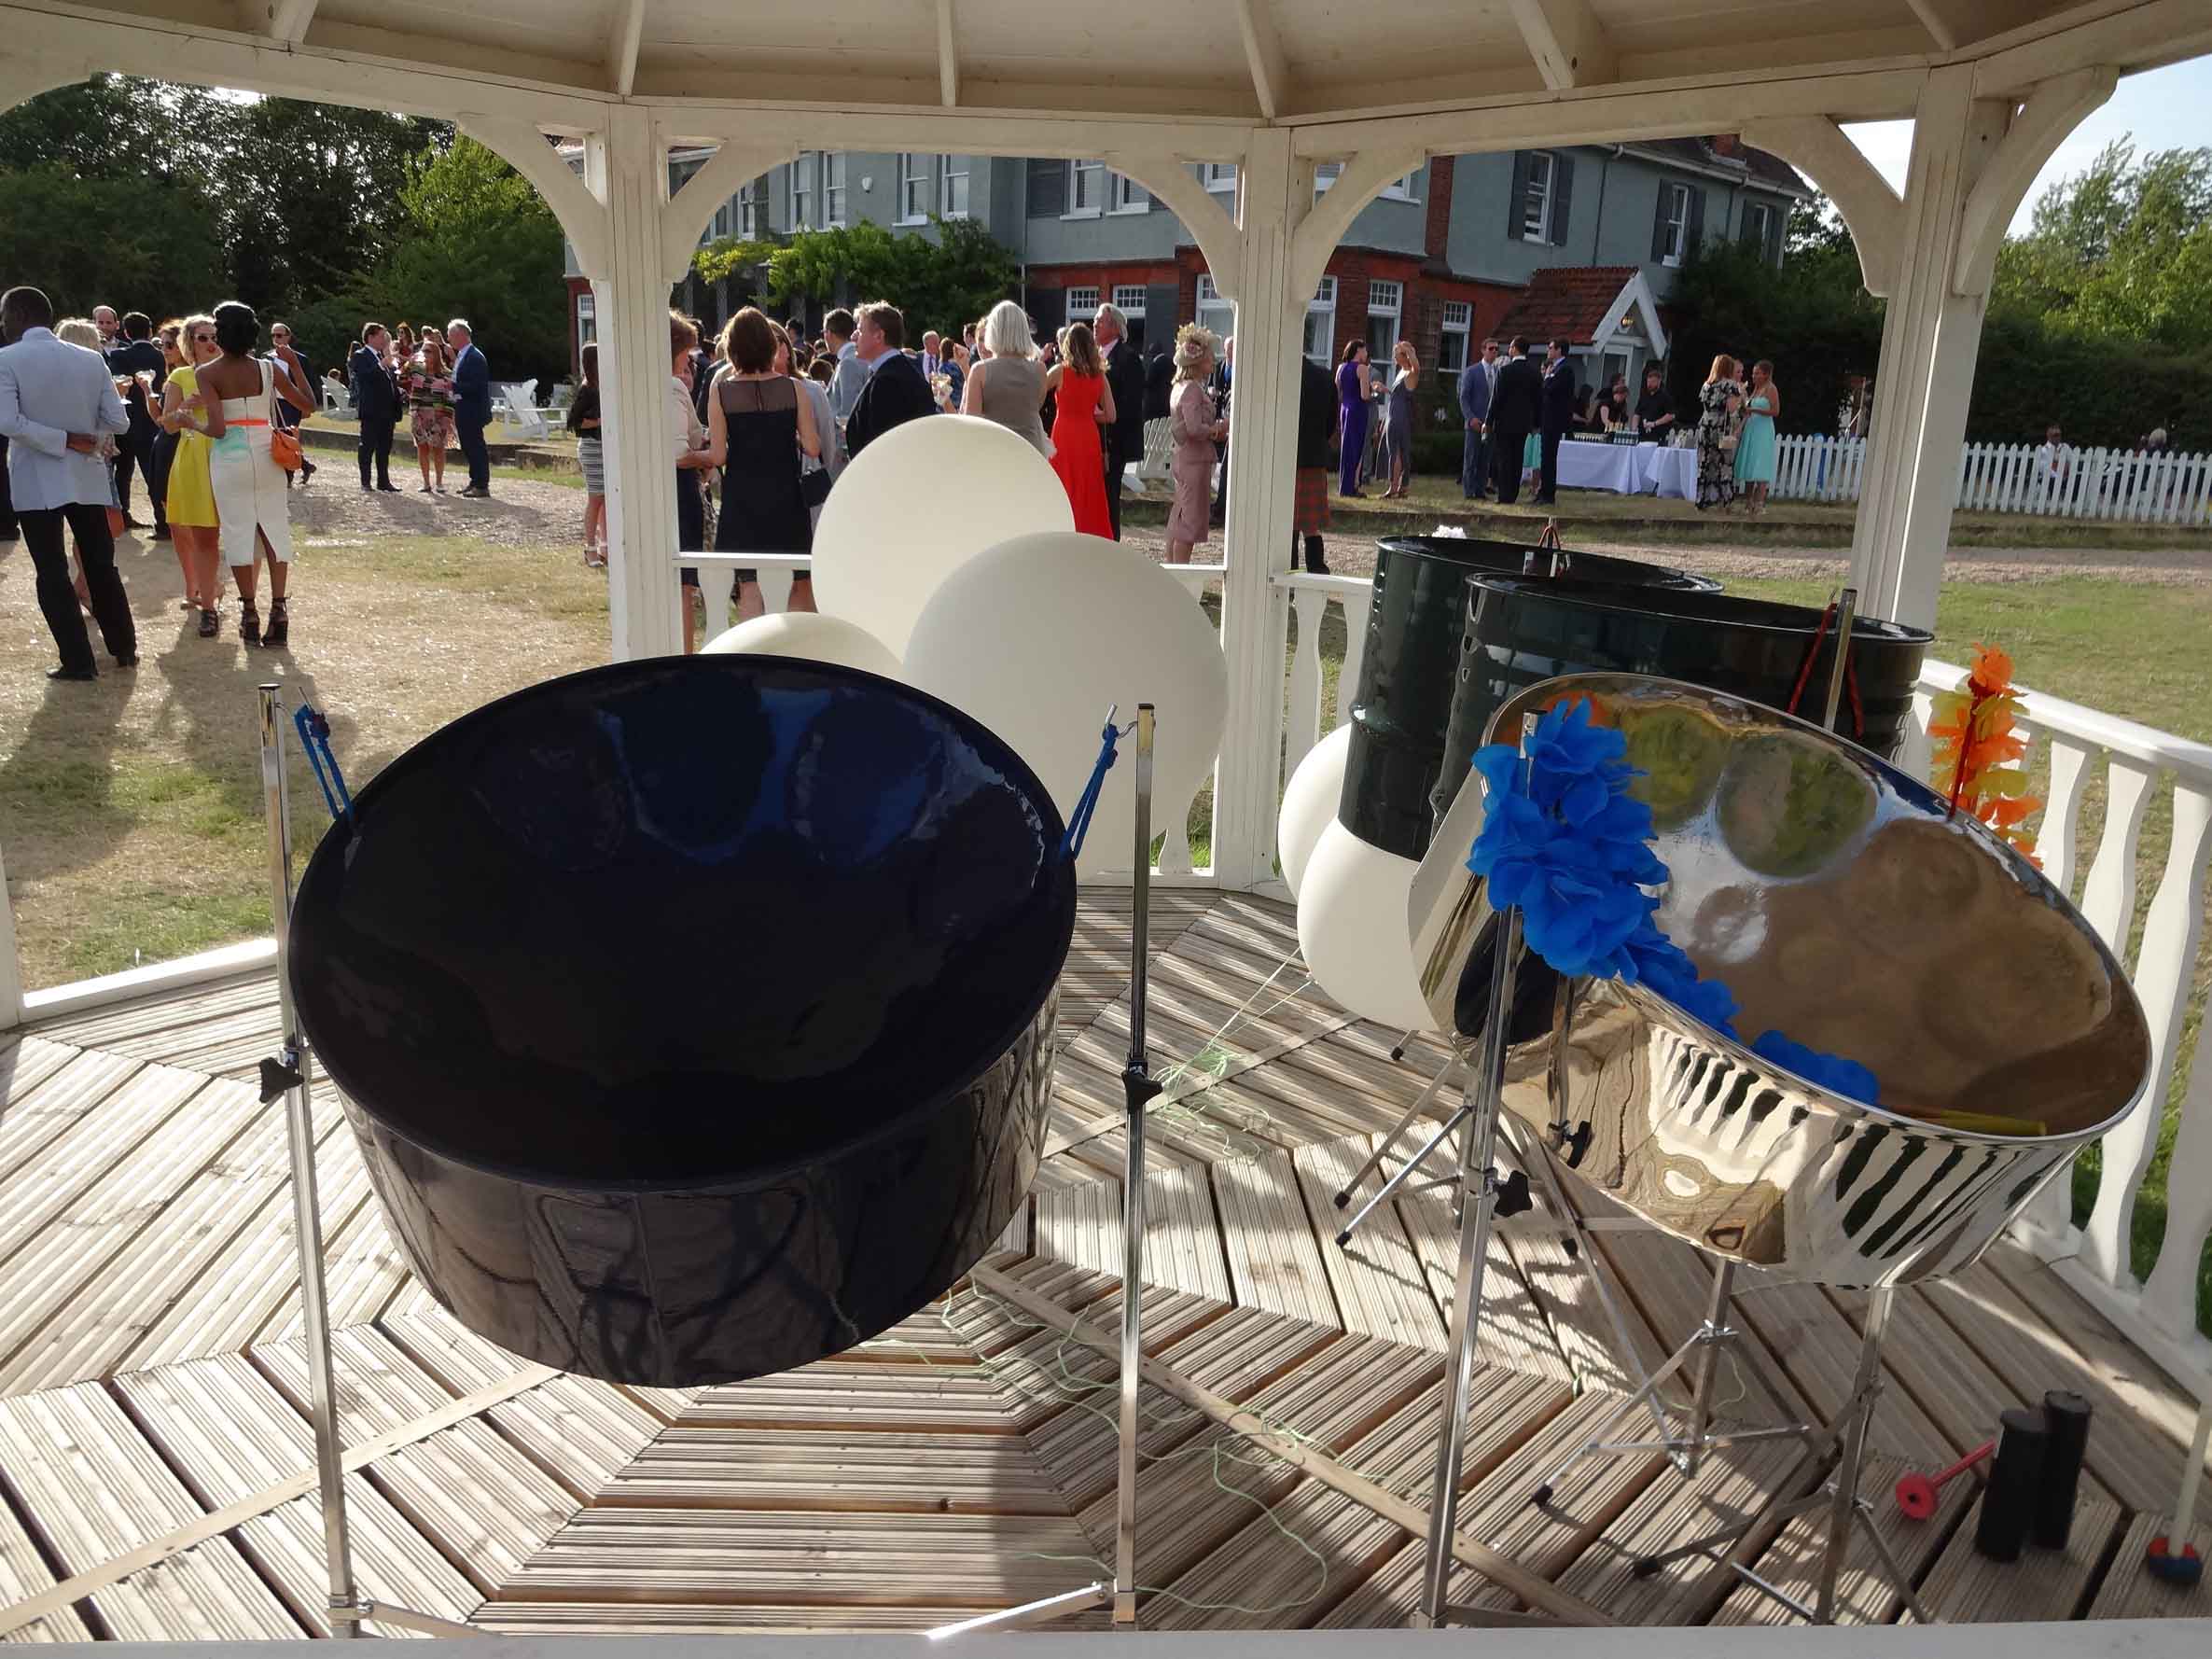 Caribbean steel drum band set up at a wedding on Osea Island, with guests enjoying drinks and celebrating in a picturesque venue.